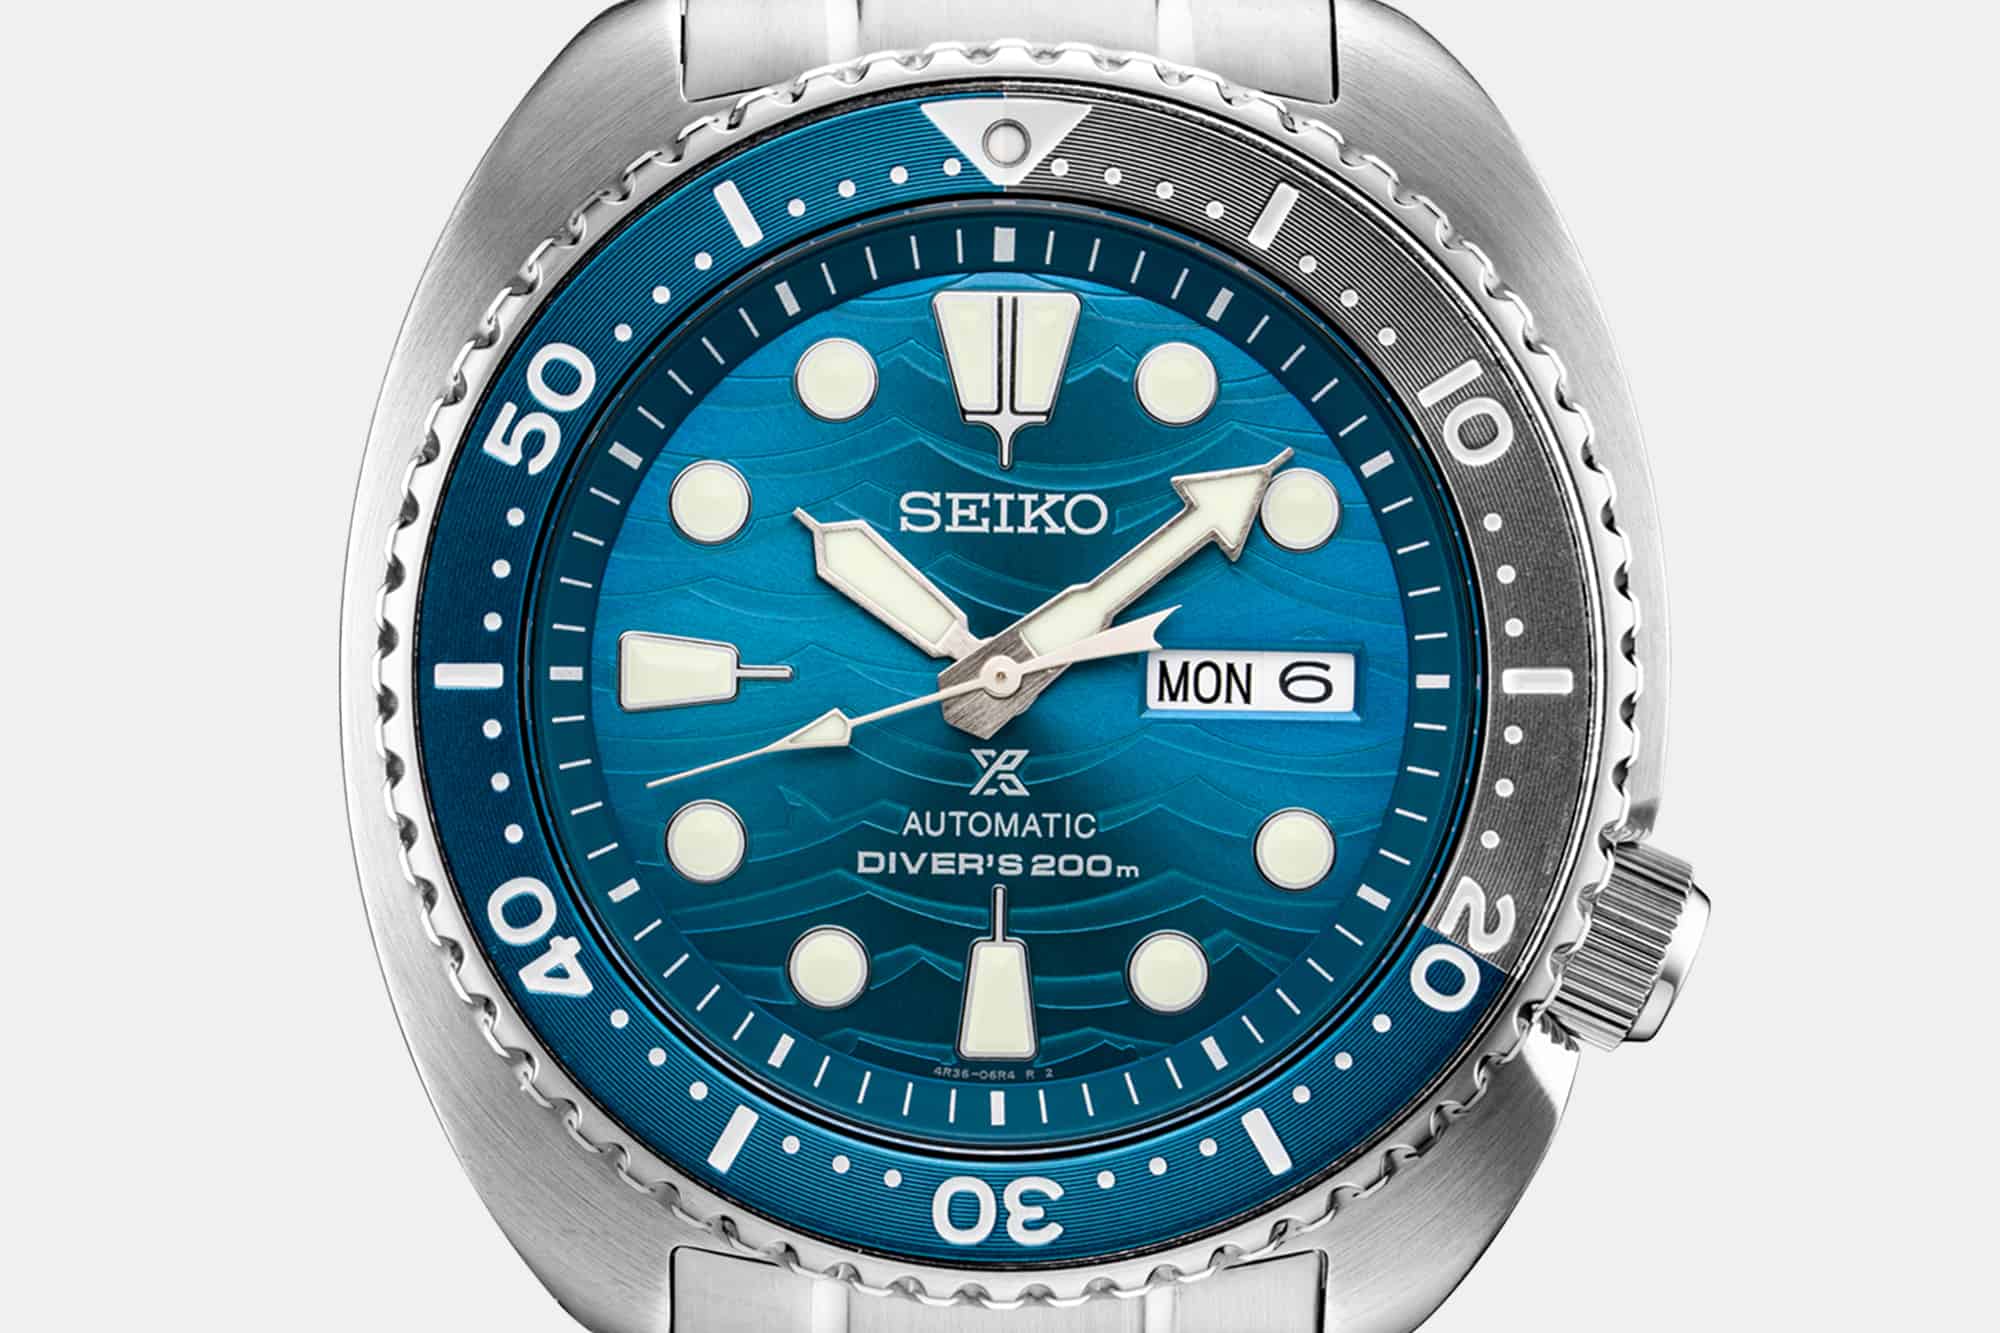 Introducing the Seiko "Save the Ocean" Turtle Ref. SRPD21 and Ref. SRPD23 - Worn & Wound